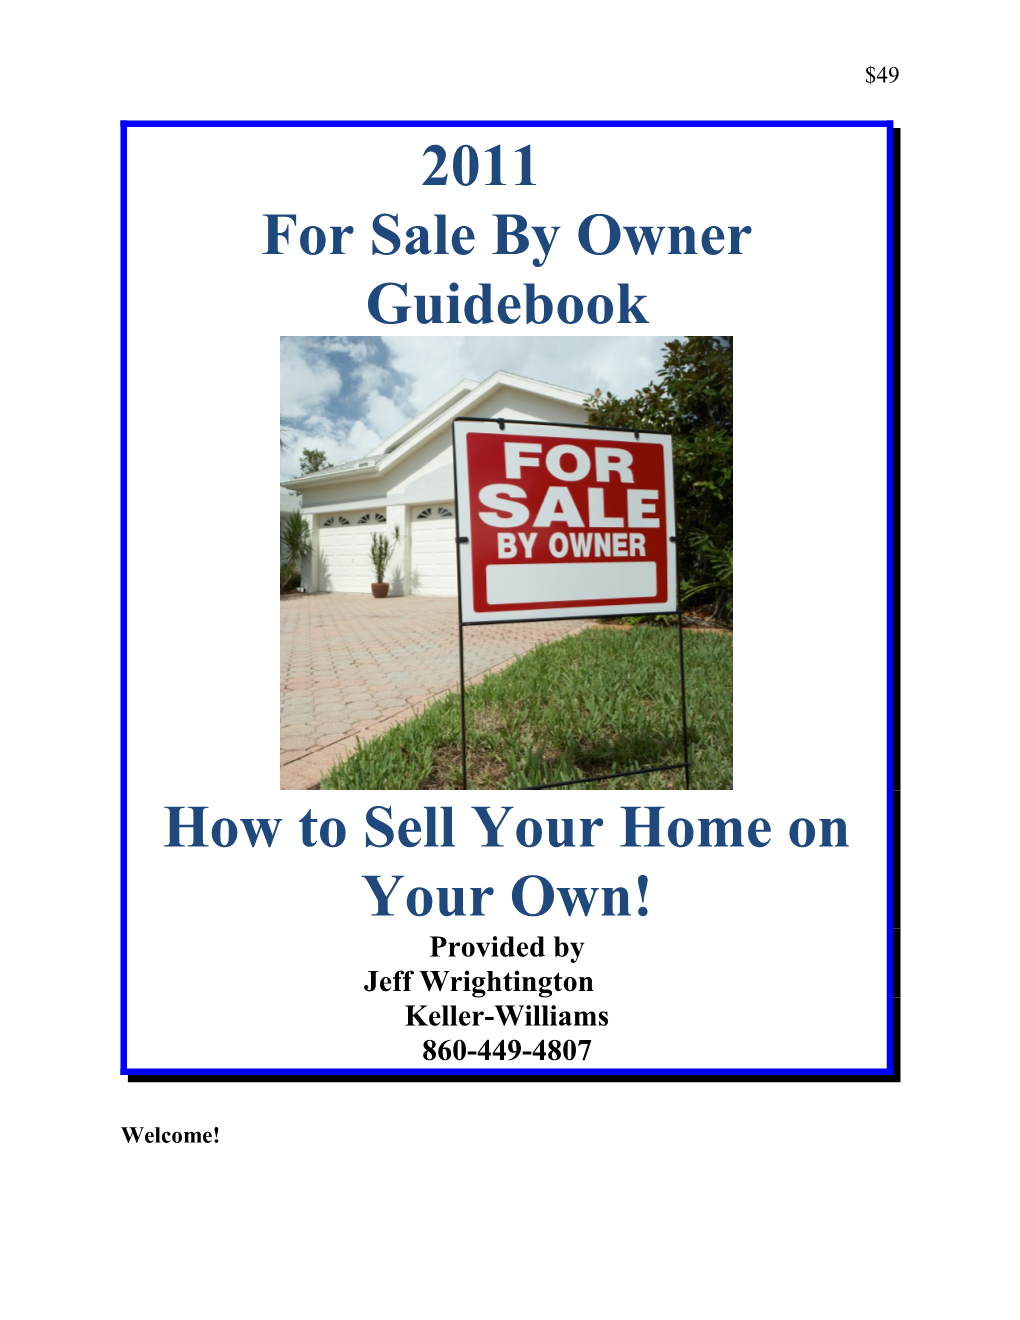 For Sale by Owner Guidebook